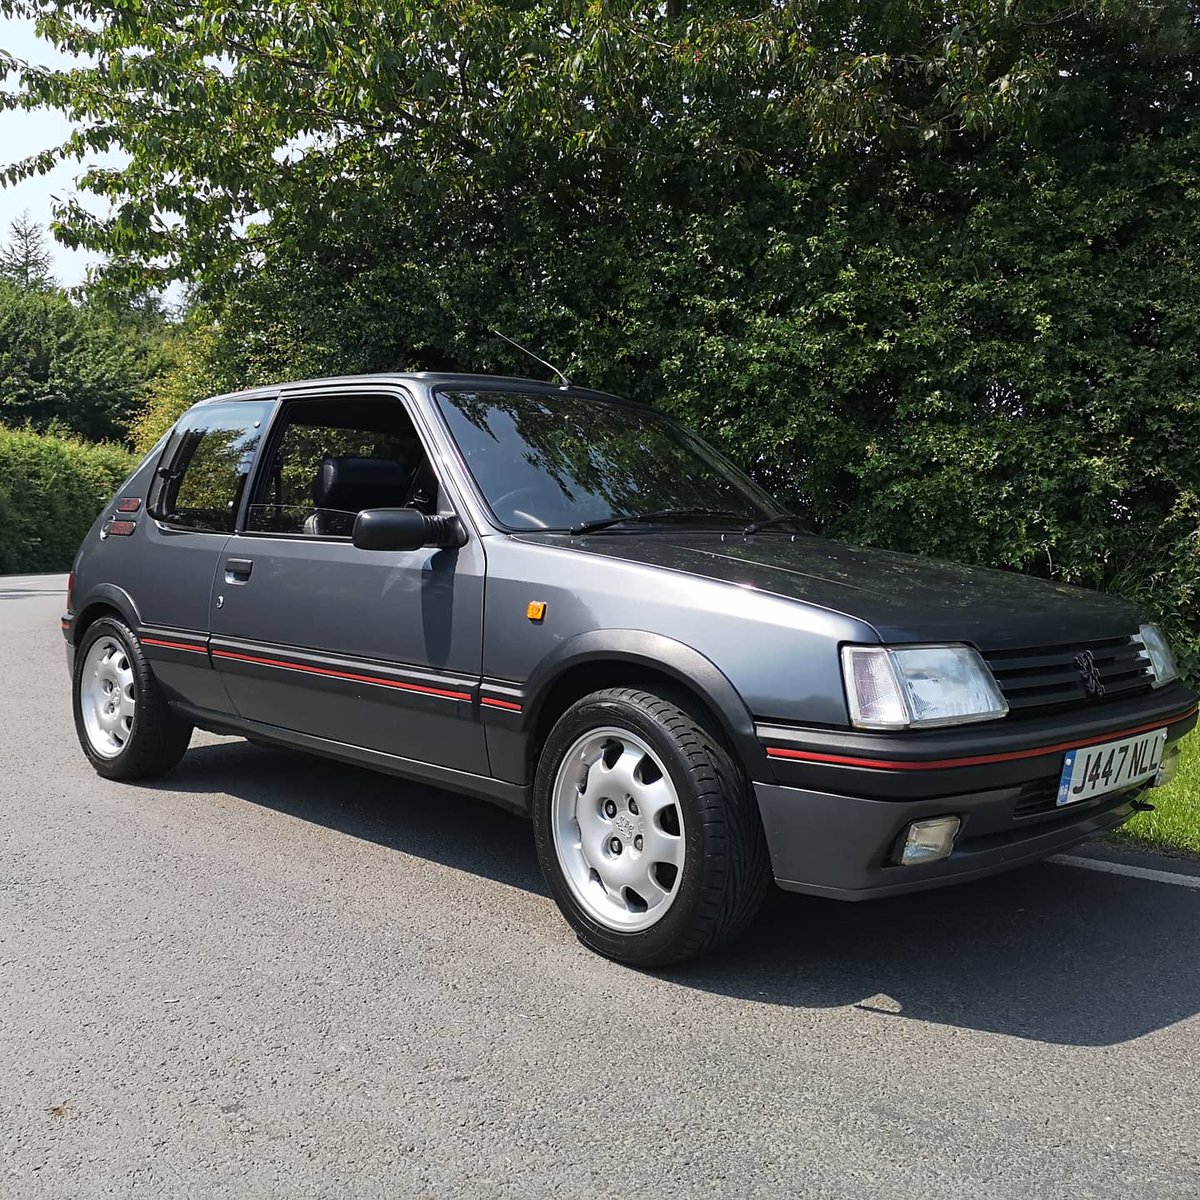 B-Road blast, 90s style! #classiccars #peugeot #205gti #retro #retroclothing #rayban #clubmaster